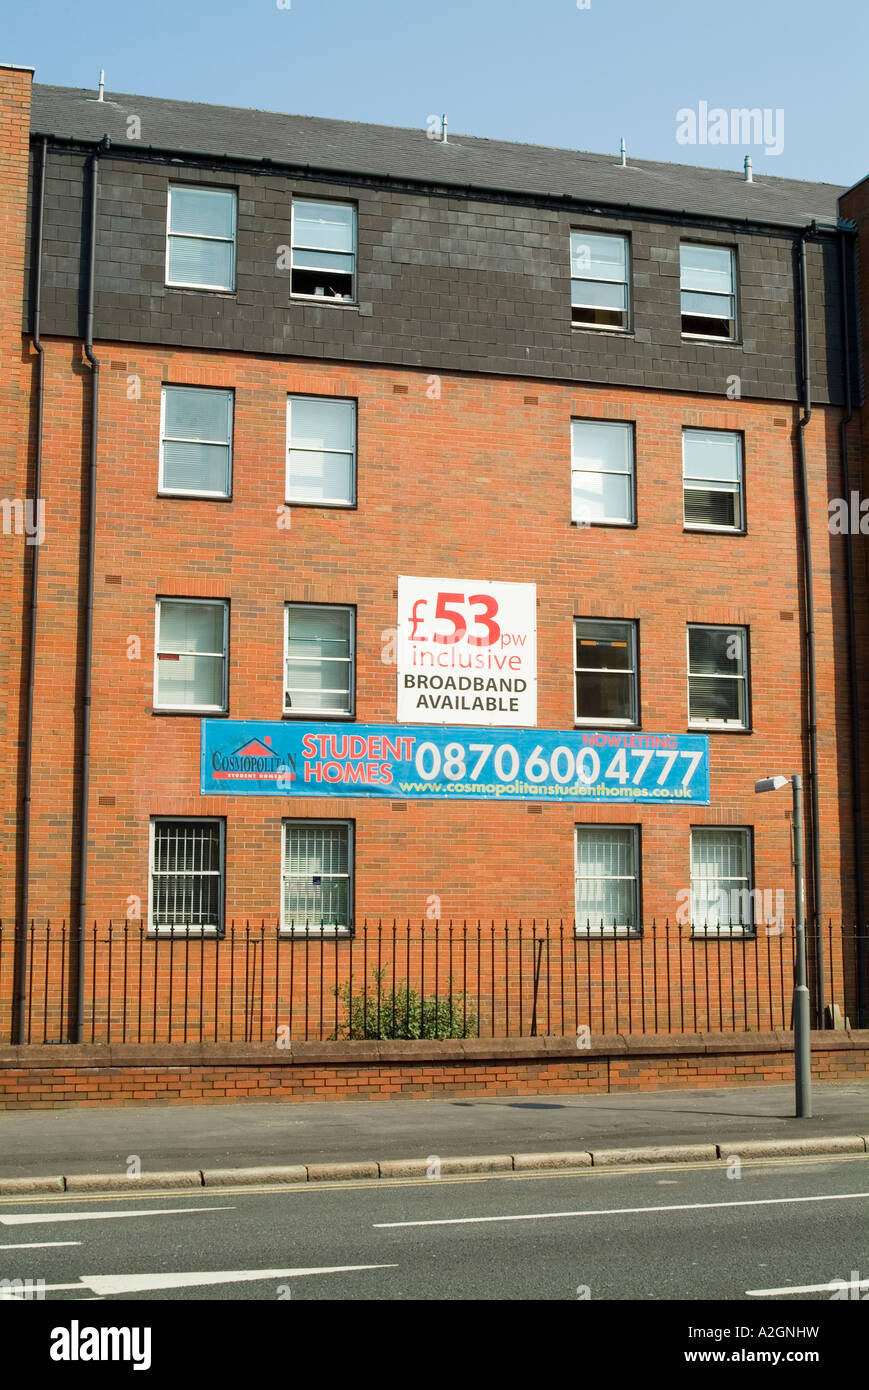 Student accomodation in Upper Parliament Street in Toxteth Liverpool. UK. Stock Photo